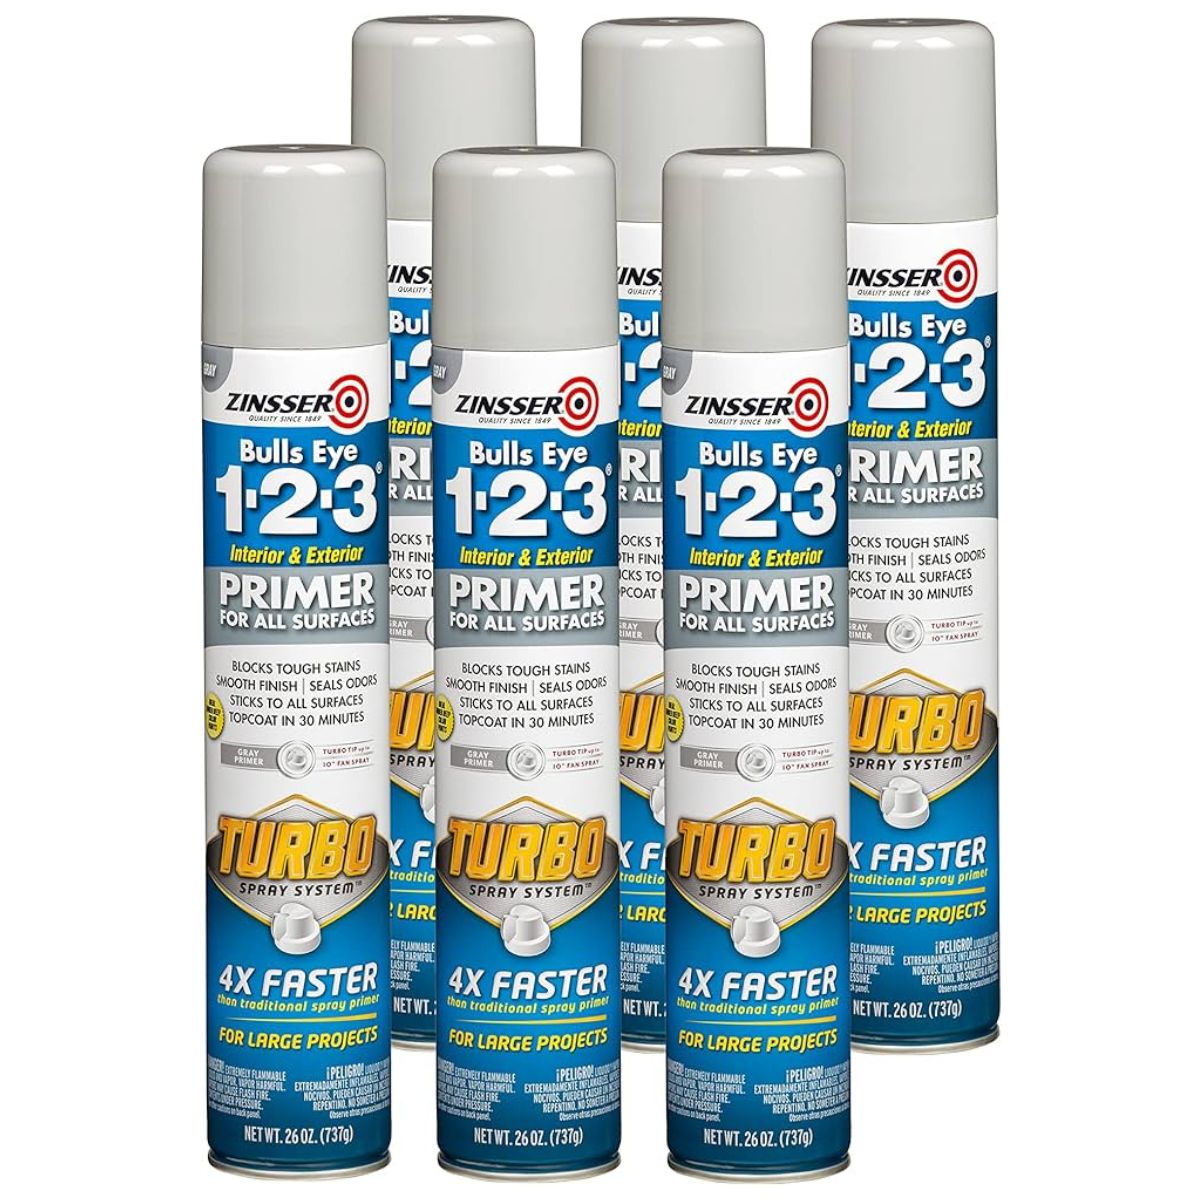 Zinsser Bulls Eye 1-2-3 Primer With Turbo Spray System, Grey | 738grams - South East Clearance Centre